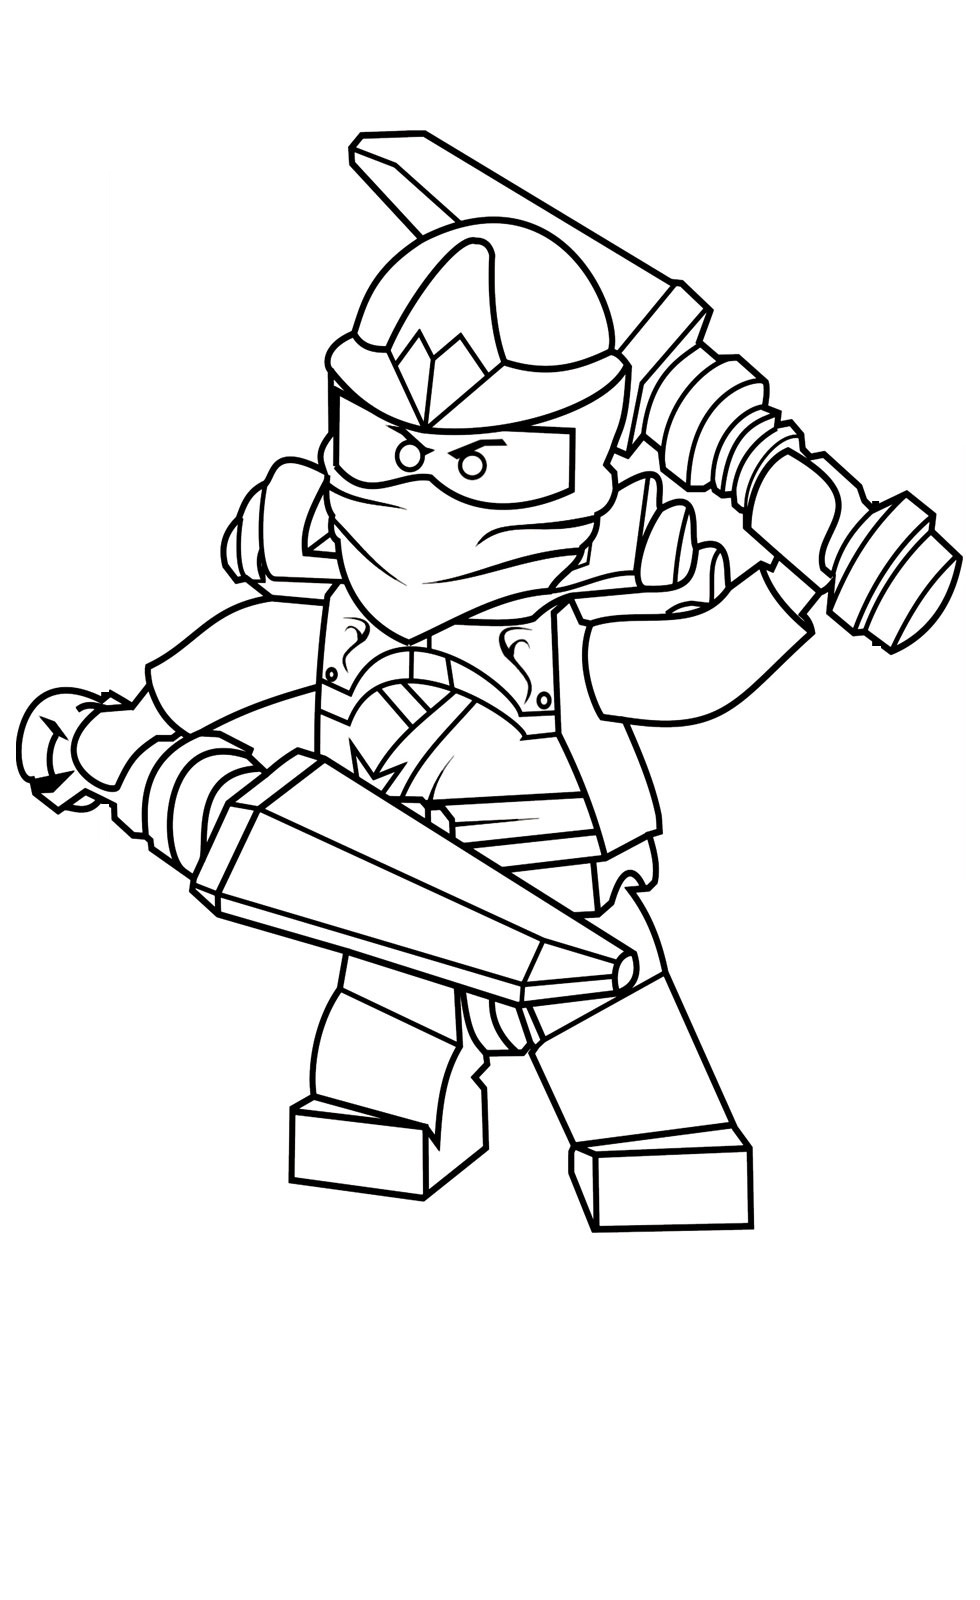 Lego Ninjago Coloring Pages Best Coloring Pages For Kids